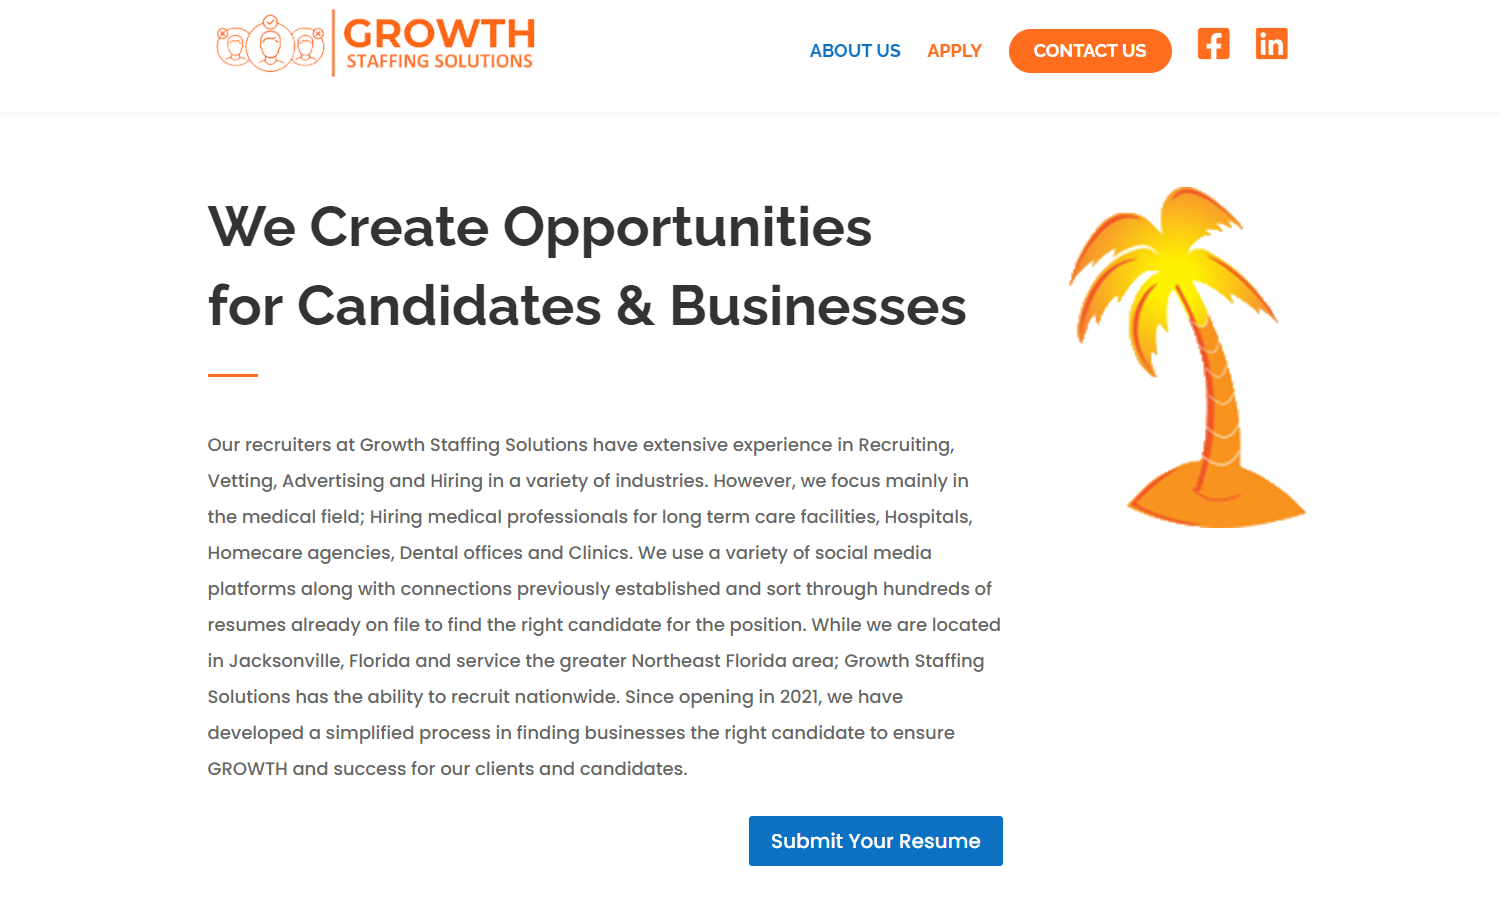 Growth Staffing Solutions Web Design About Page